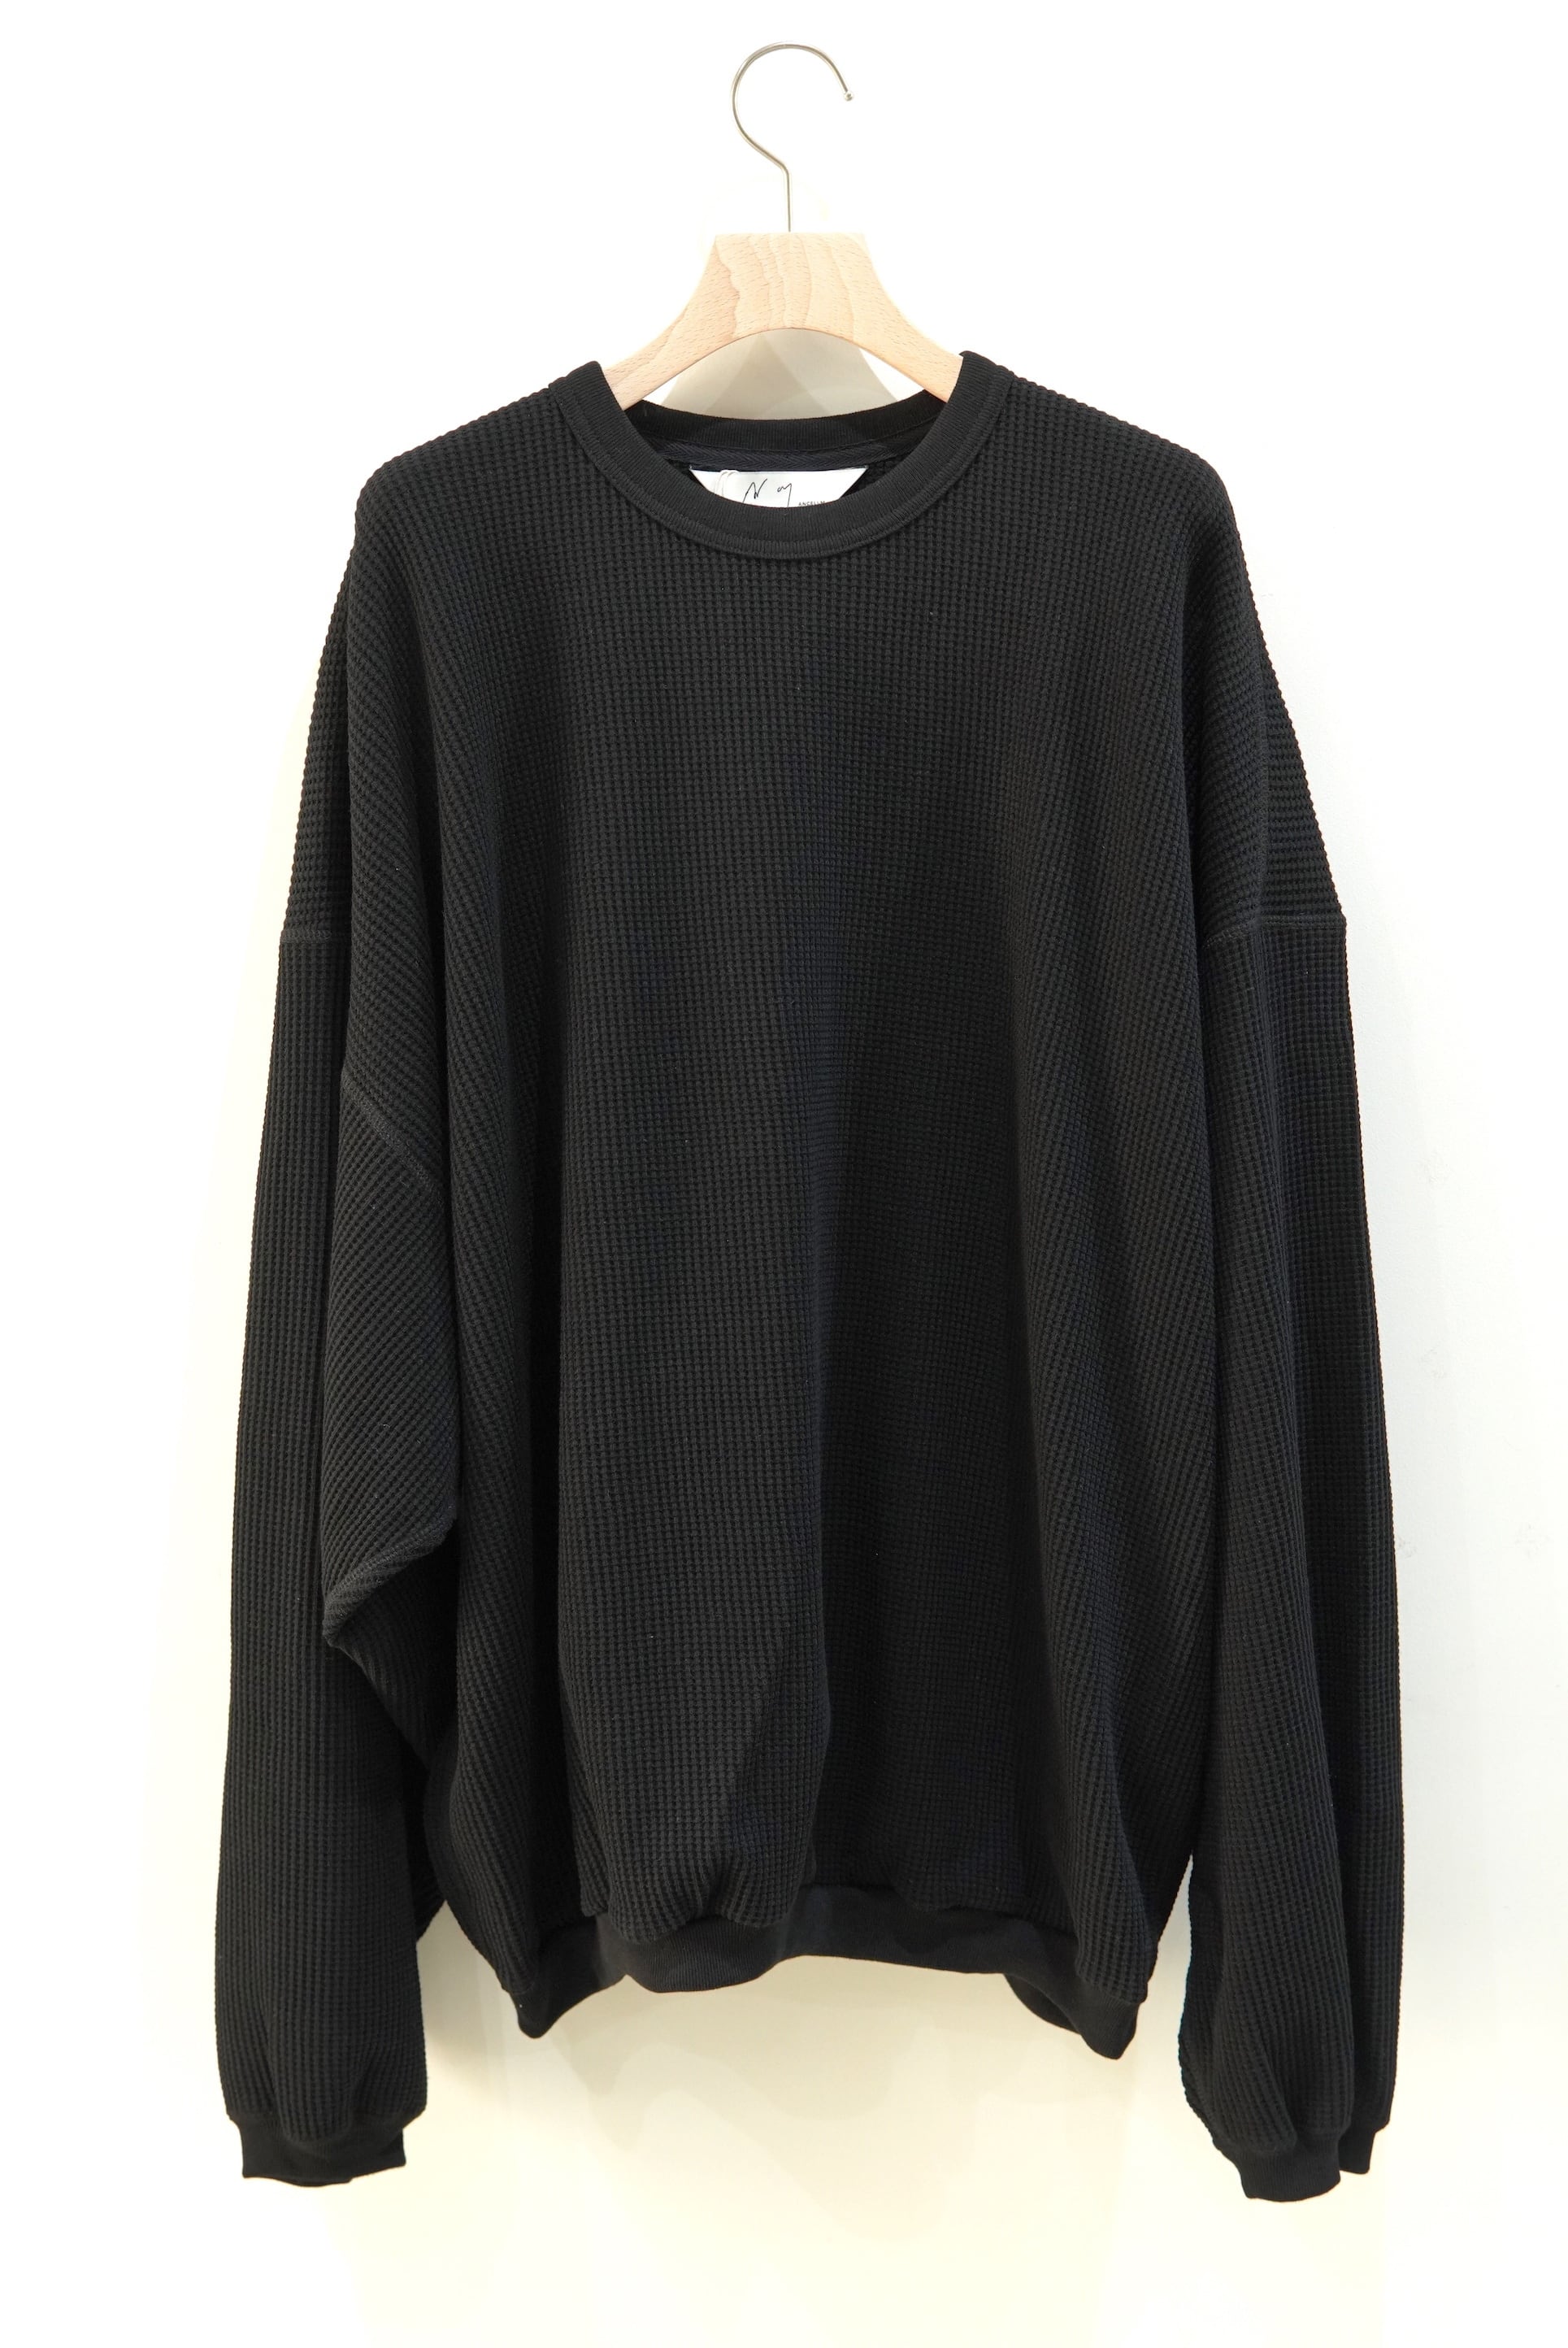 ANCELLM / WAFFLE OVERSIZED LS /  ANC-CT09-A